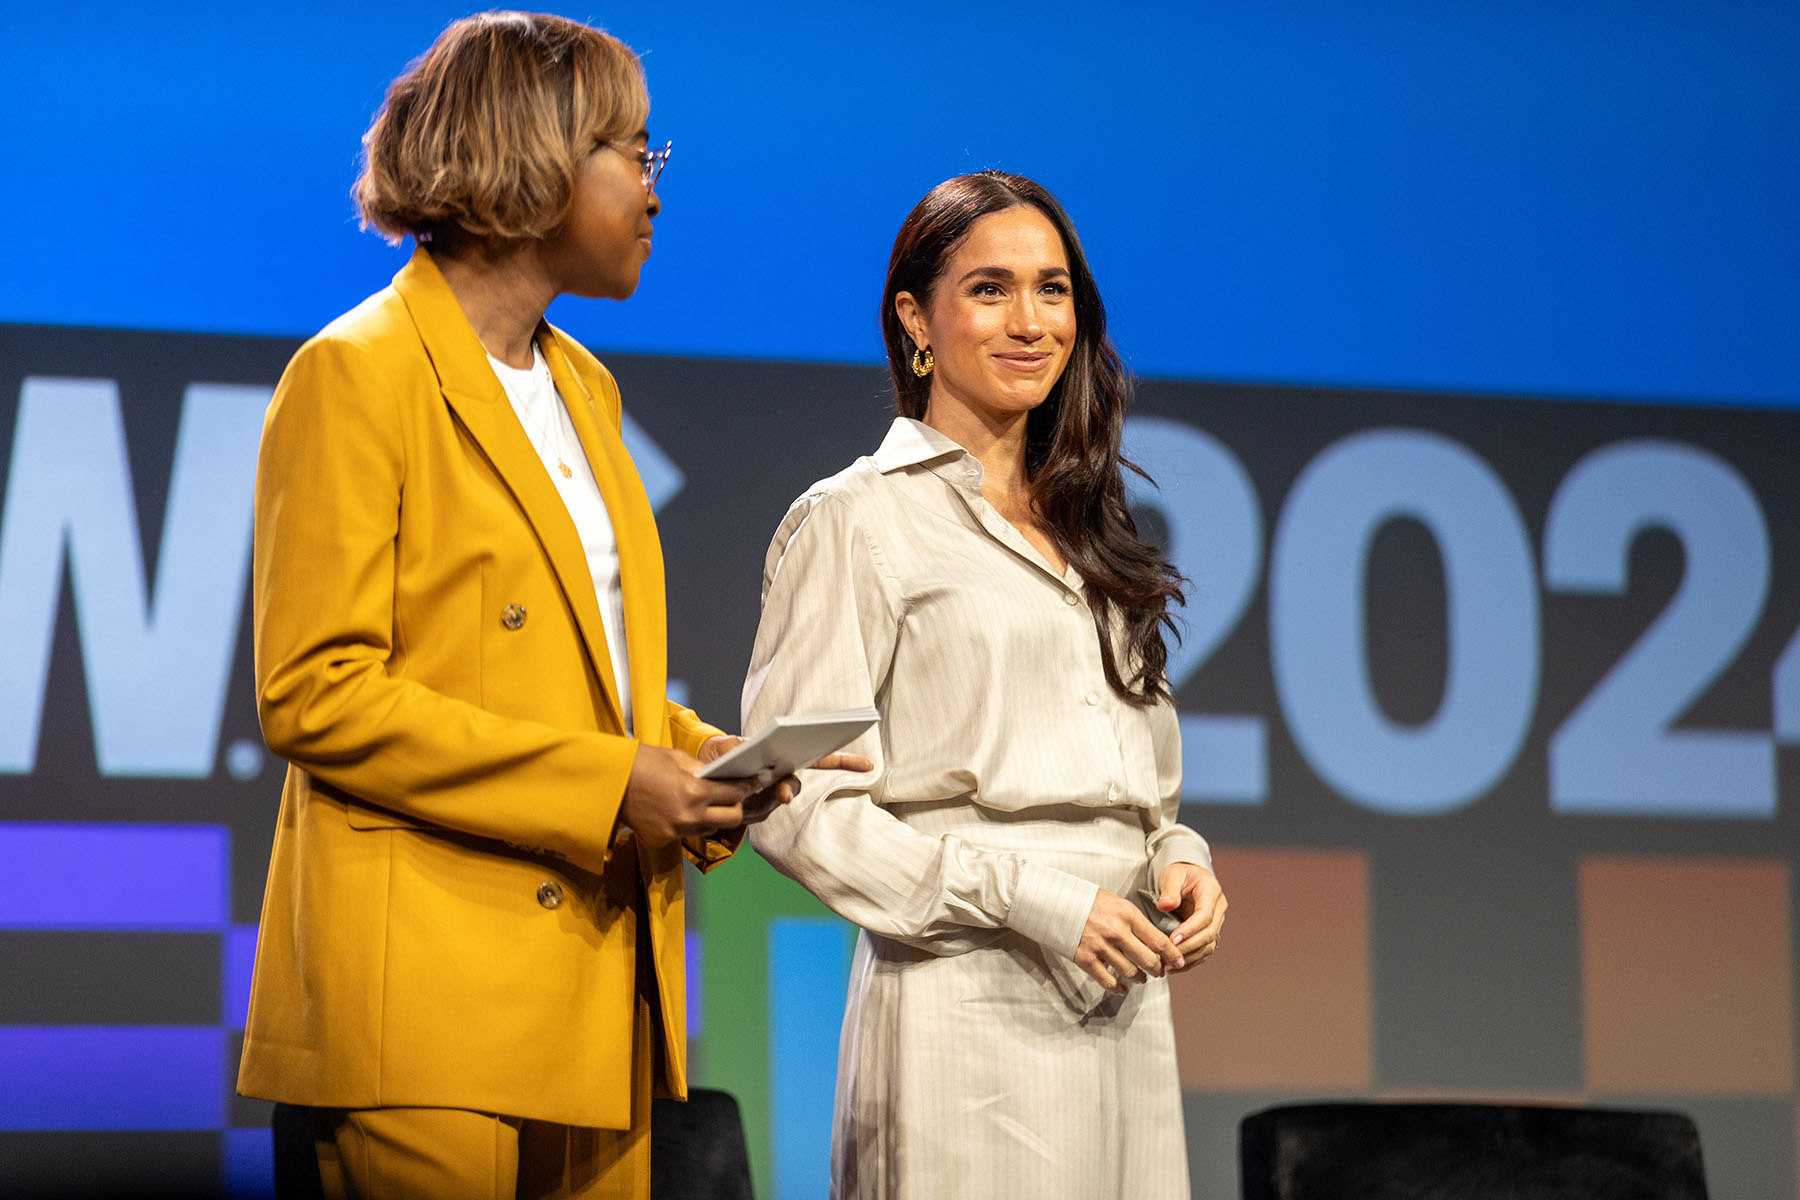 Meghan, Duchess of Sussex, joins The 19th for SXSW International Women